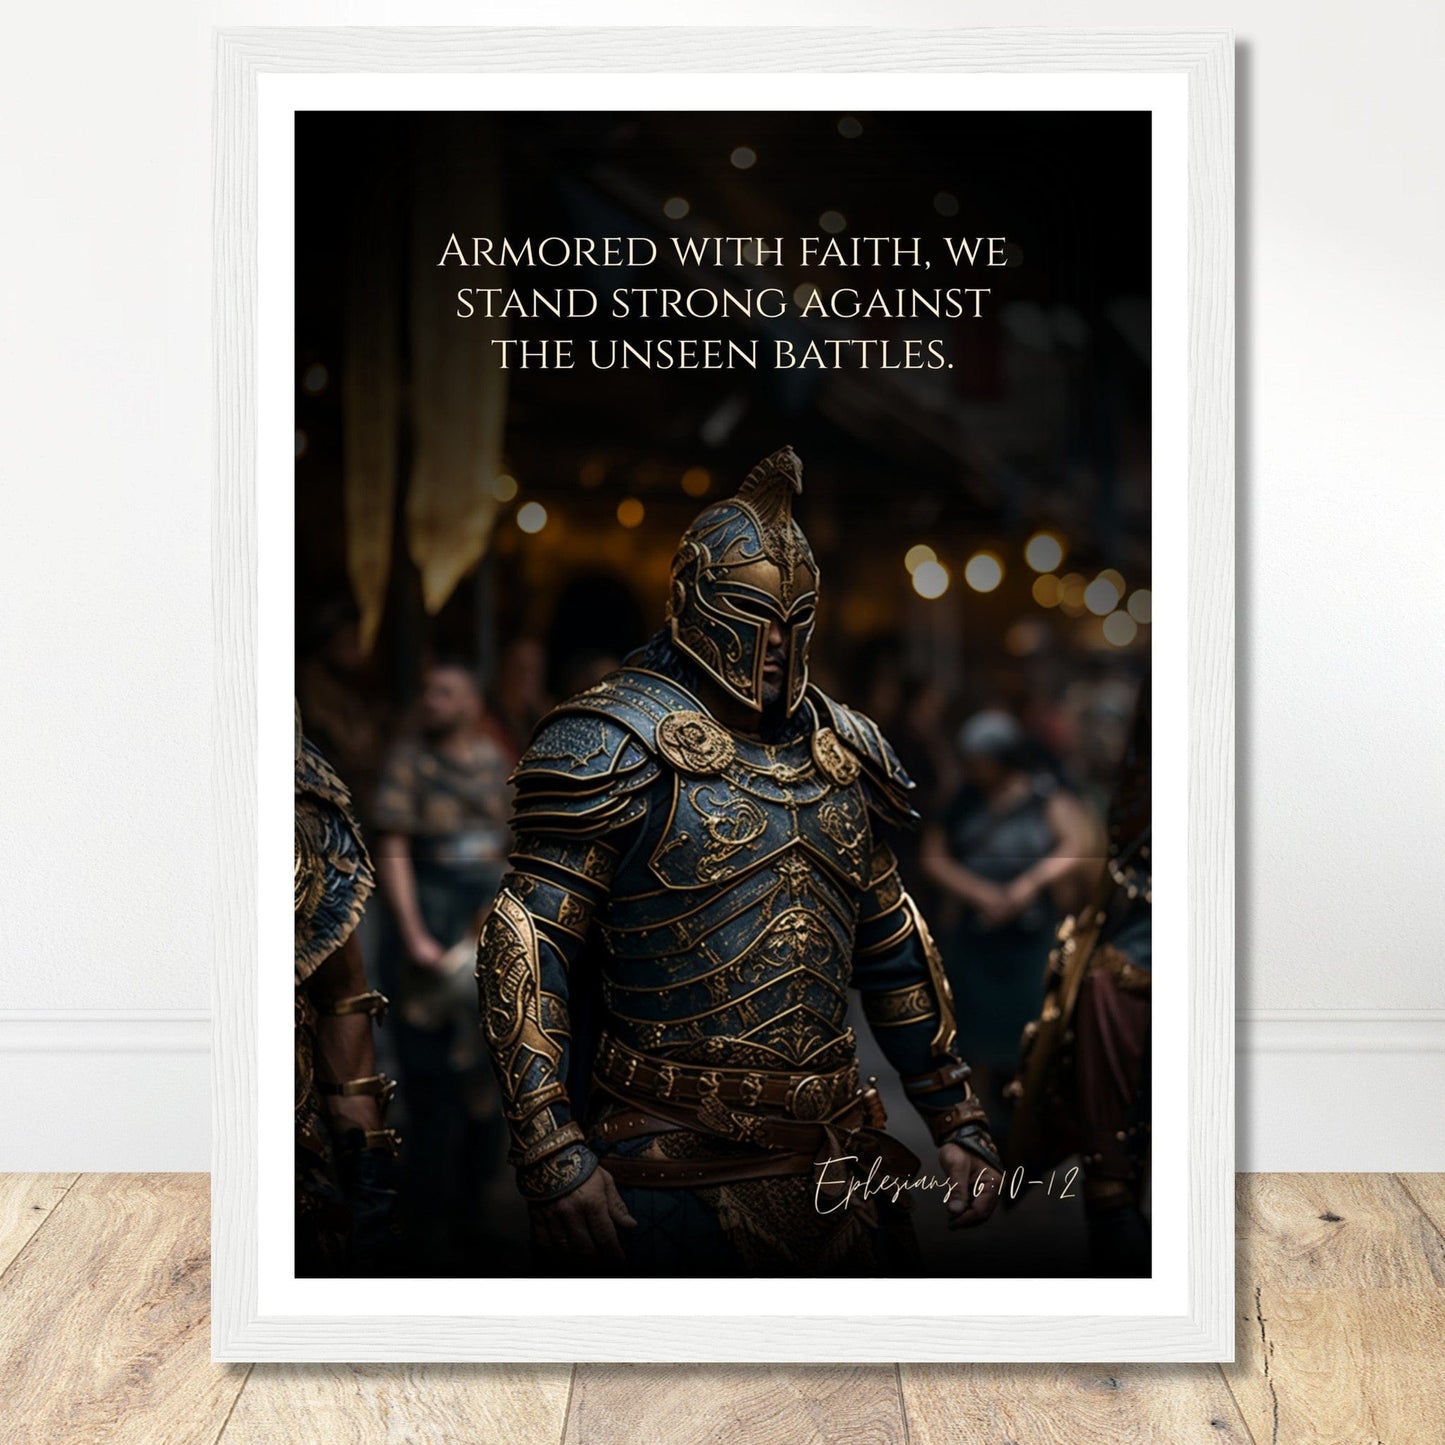 Coffee With My Father Print Material 30x40 cm / 12x16″ / Premium Matte Paper Wooden Framed Poster / White frame The Unseen Battles: Ephesians 6:10-12 - Artwork